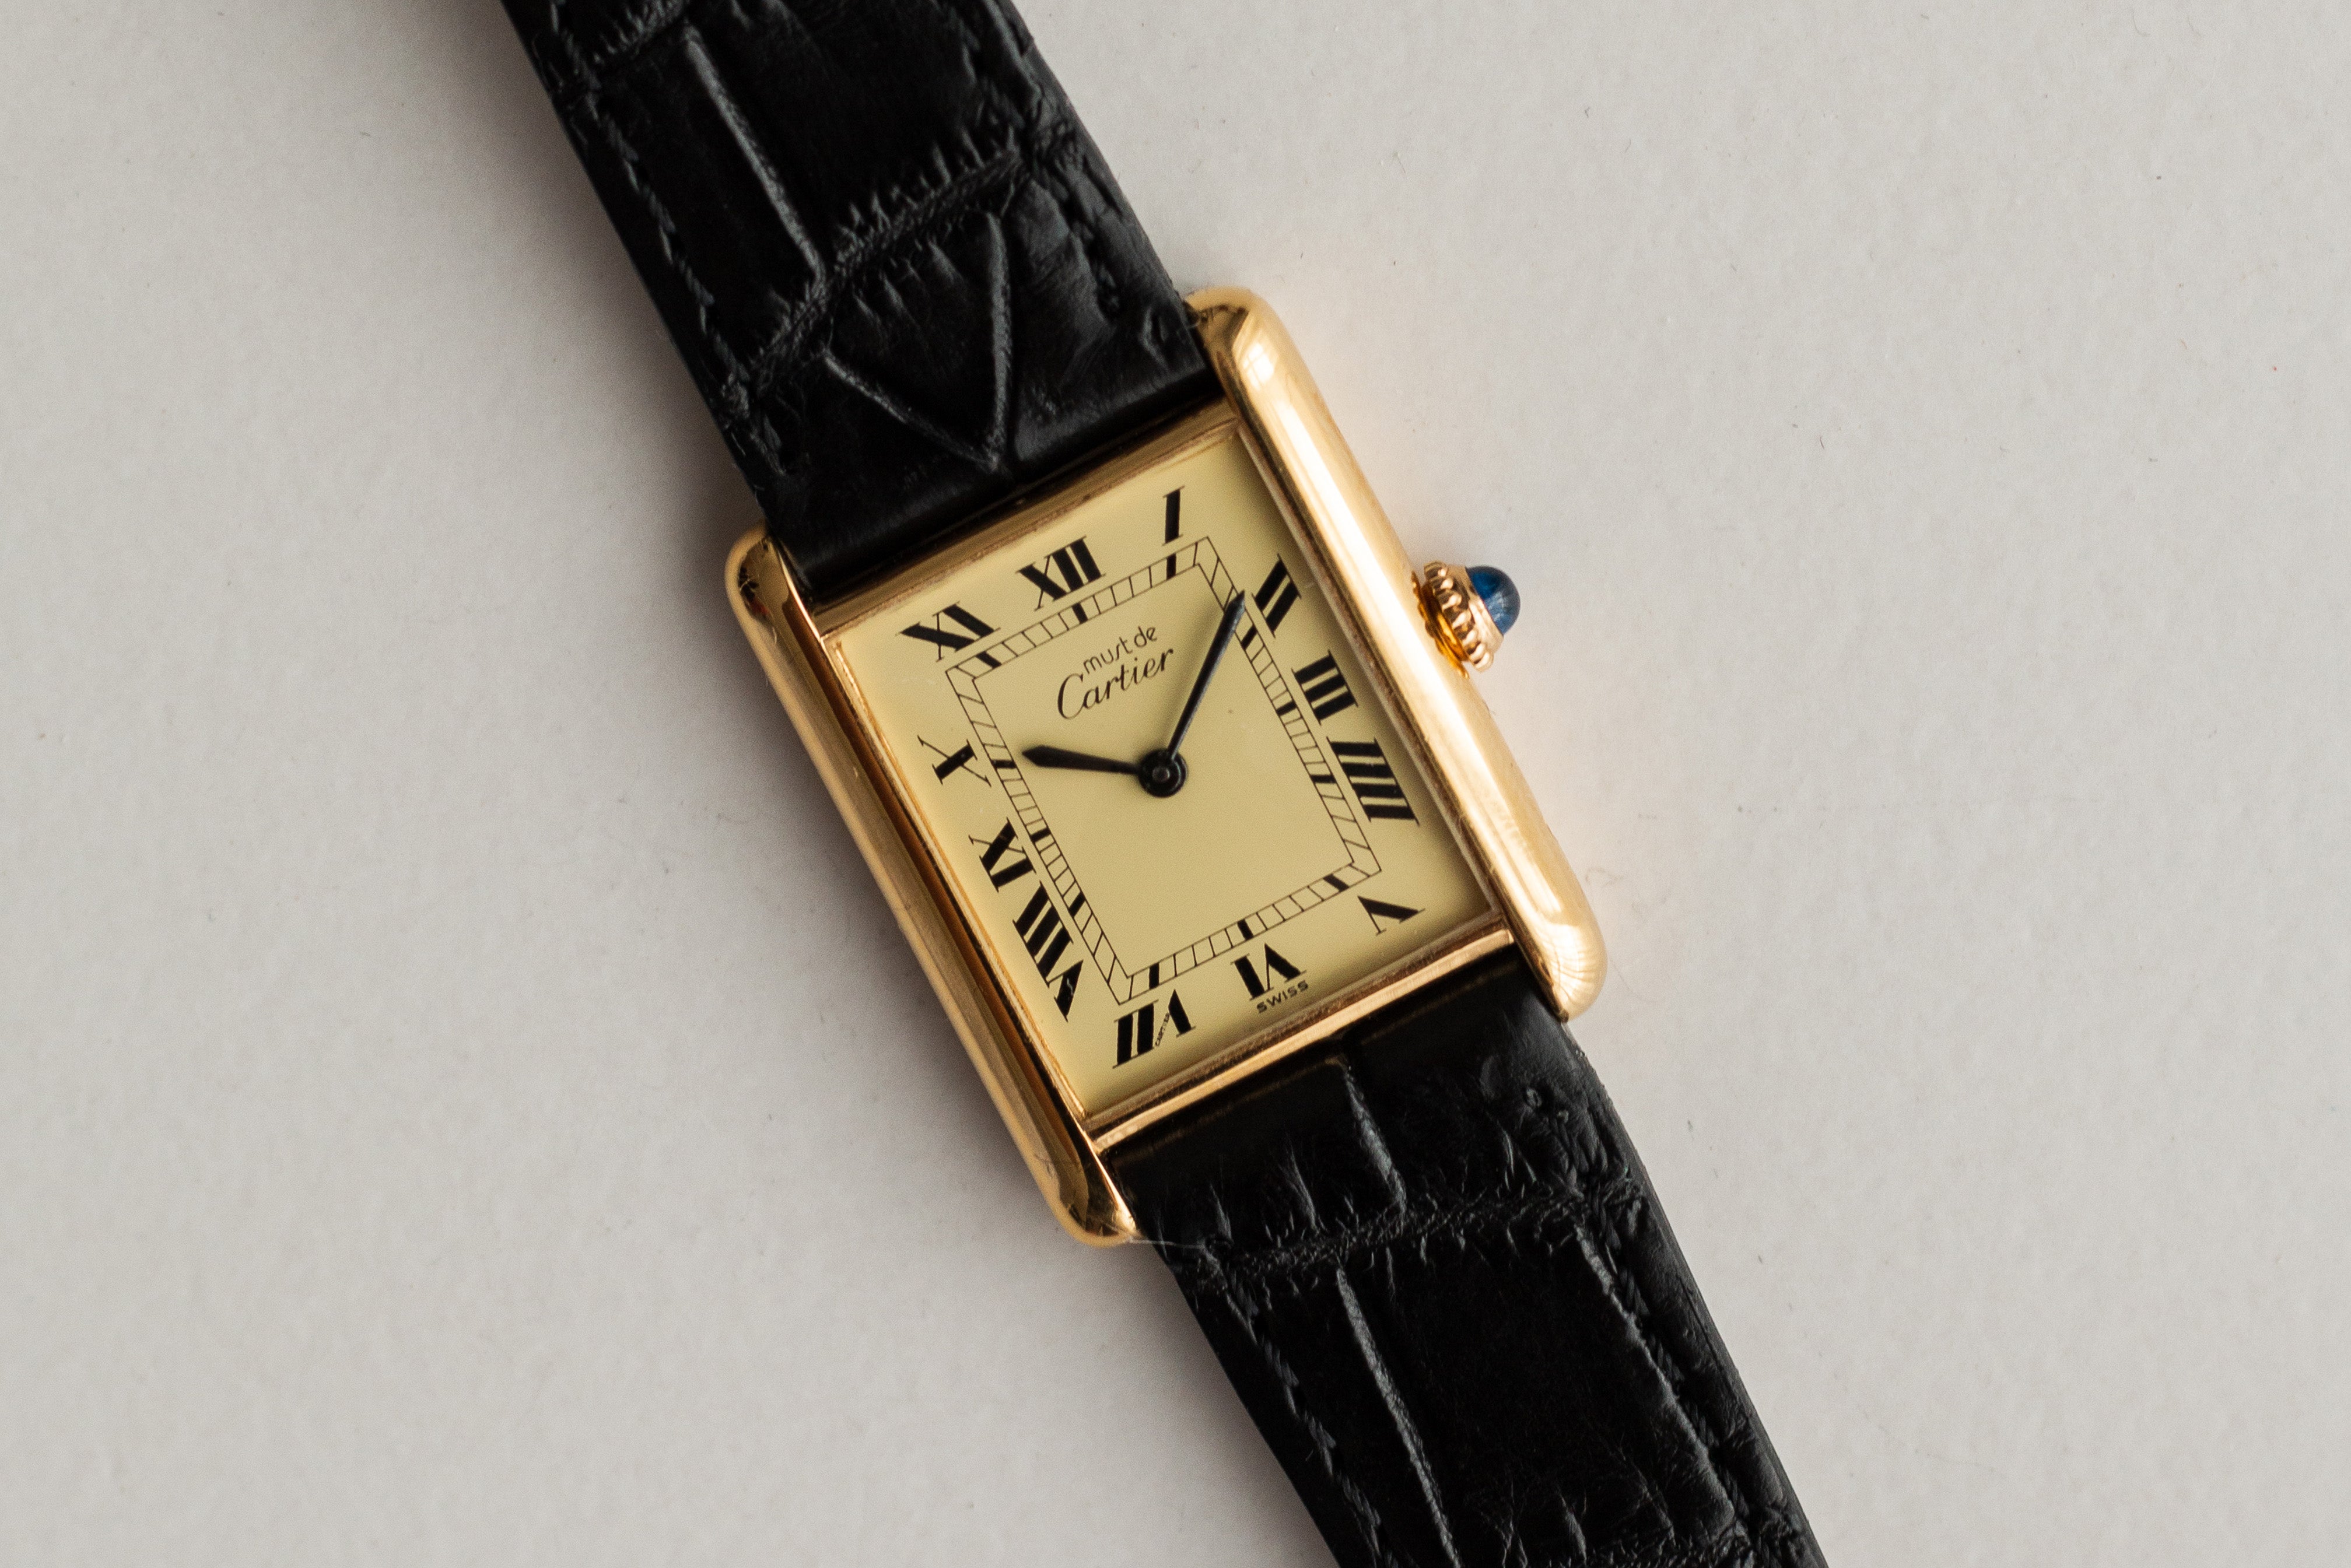 The 5 Best Cartier Watch Models To Start Your Cartier Collection